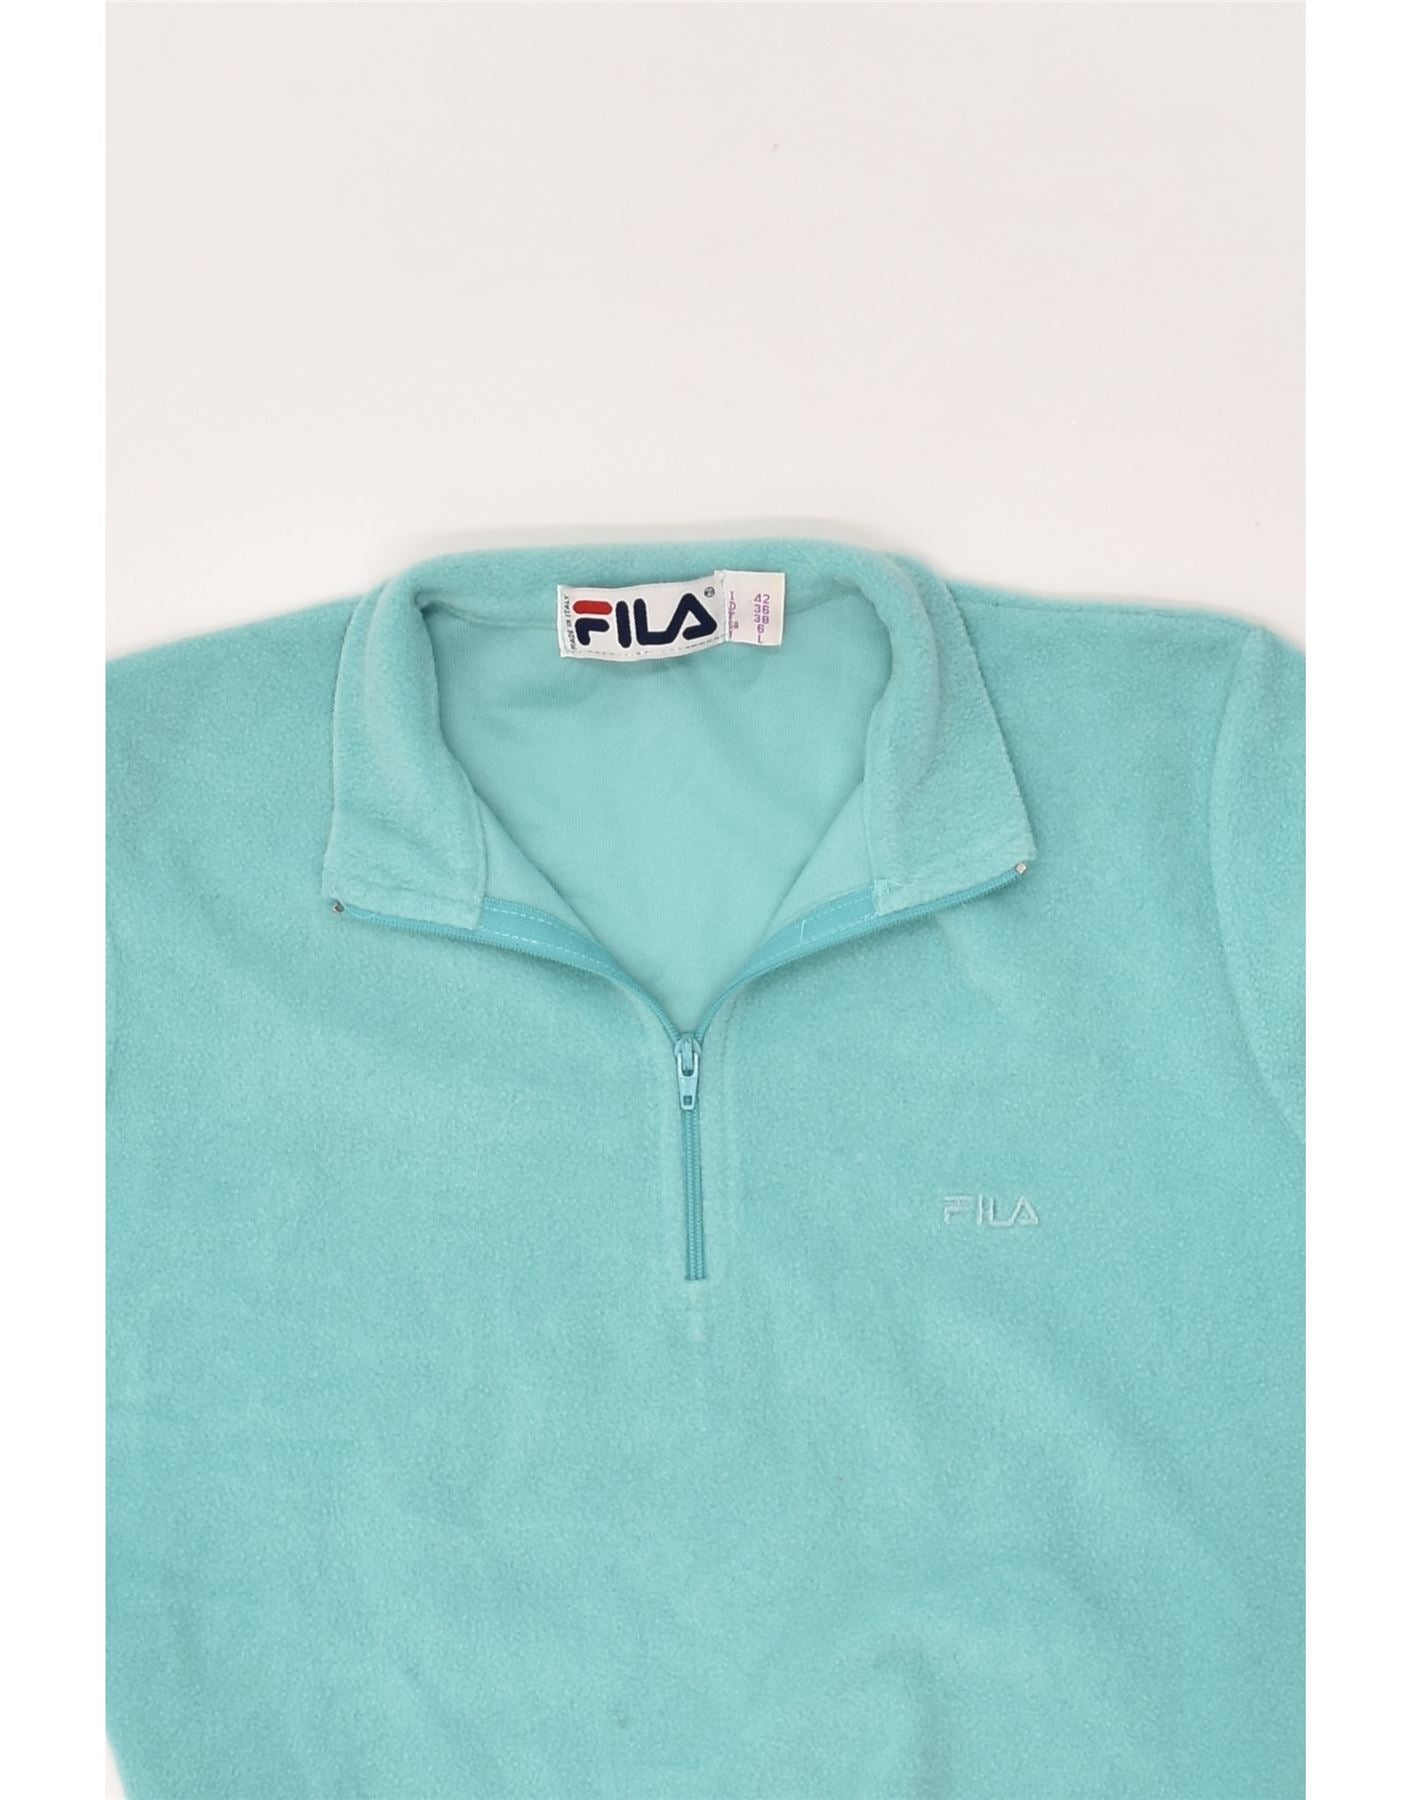 FILA Womens Fleece Bodysuit EU 36 Small Turquoise Polyester, Vintage &  Second-Hand Clothing Online